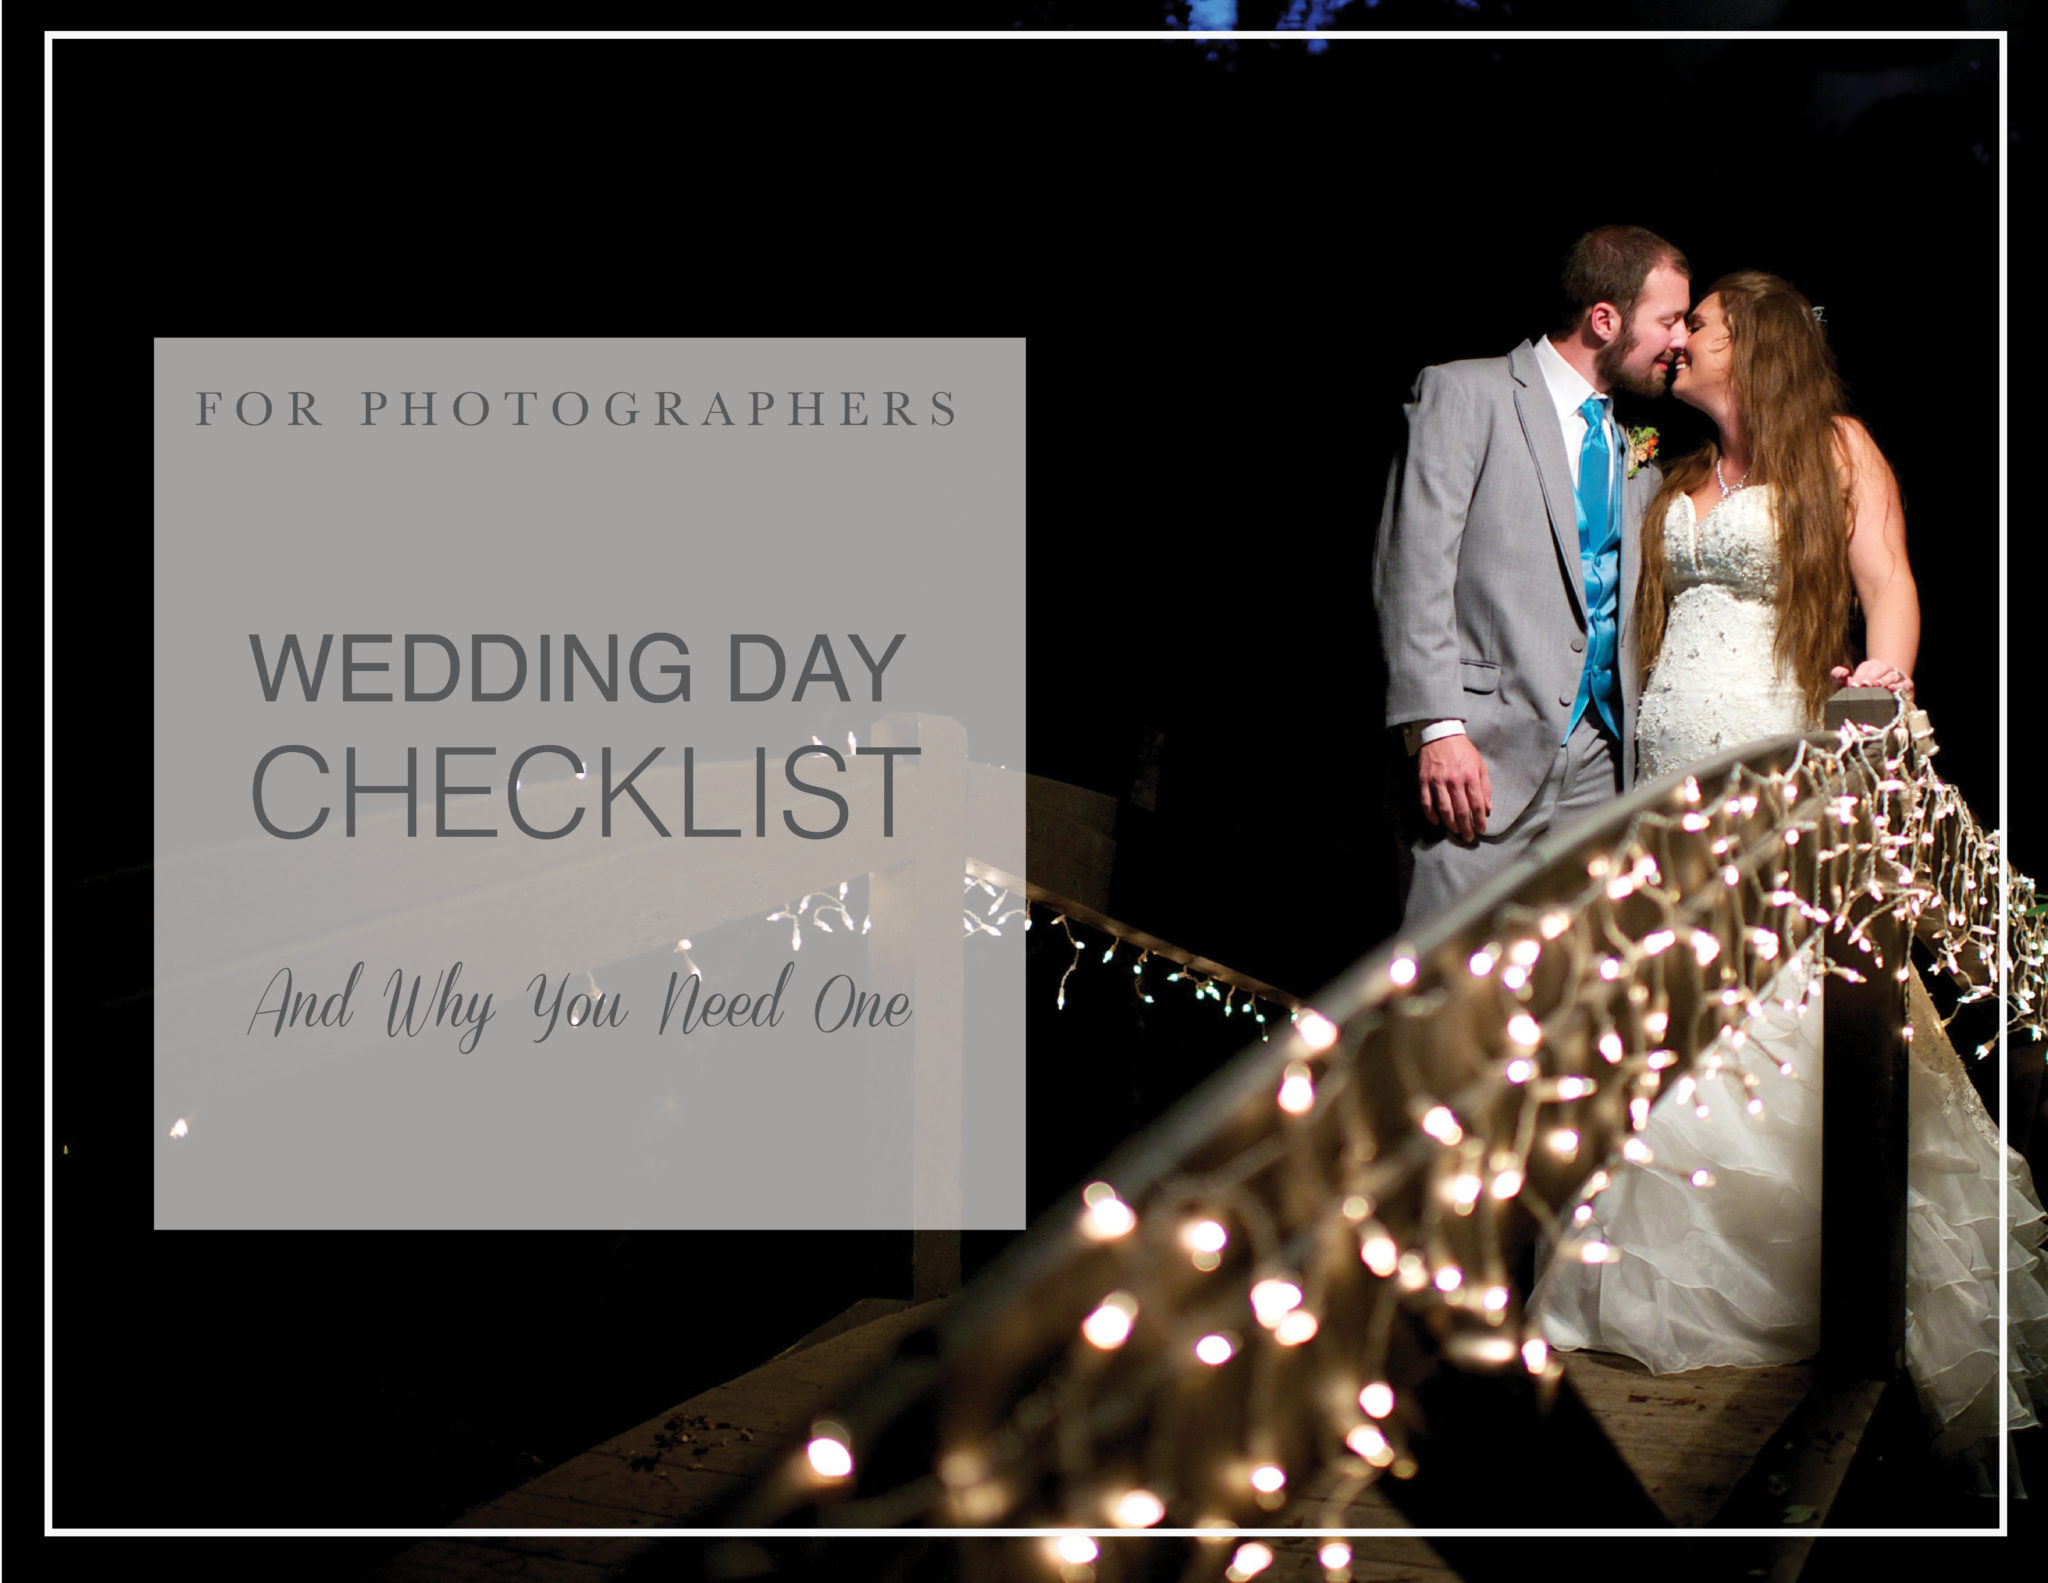 For Photographers- Wedding Day Checklist